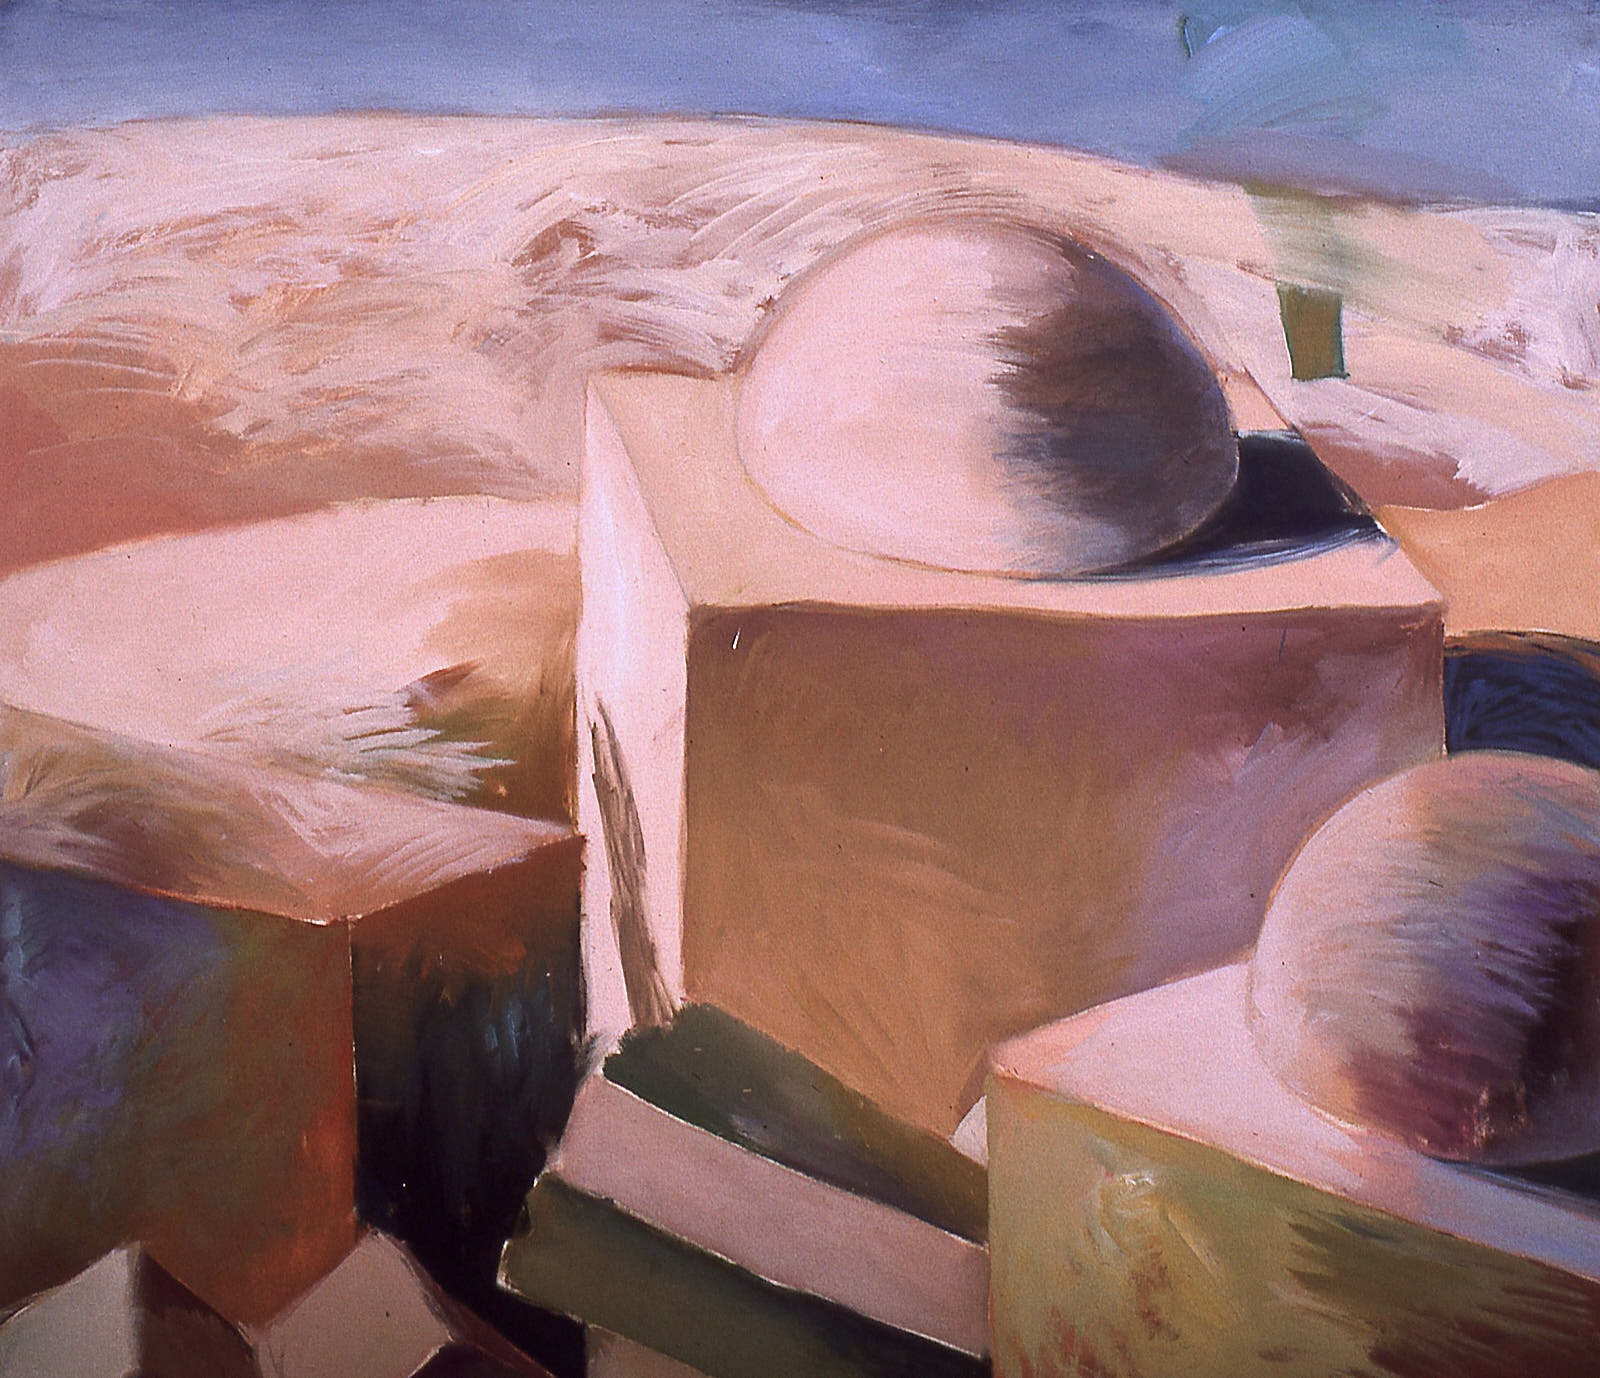 El Oued (c), 1998 oil on canvas. 35 x 40'' collection of John Lesser